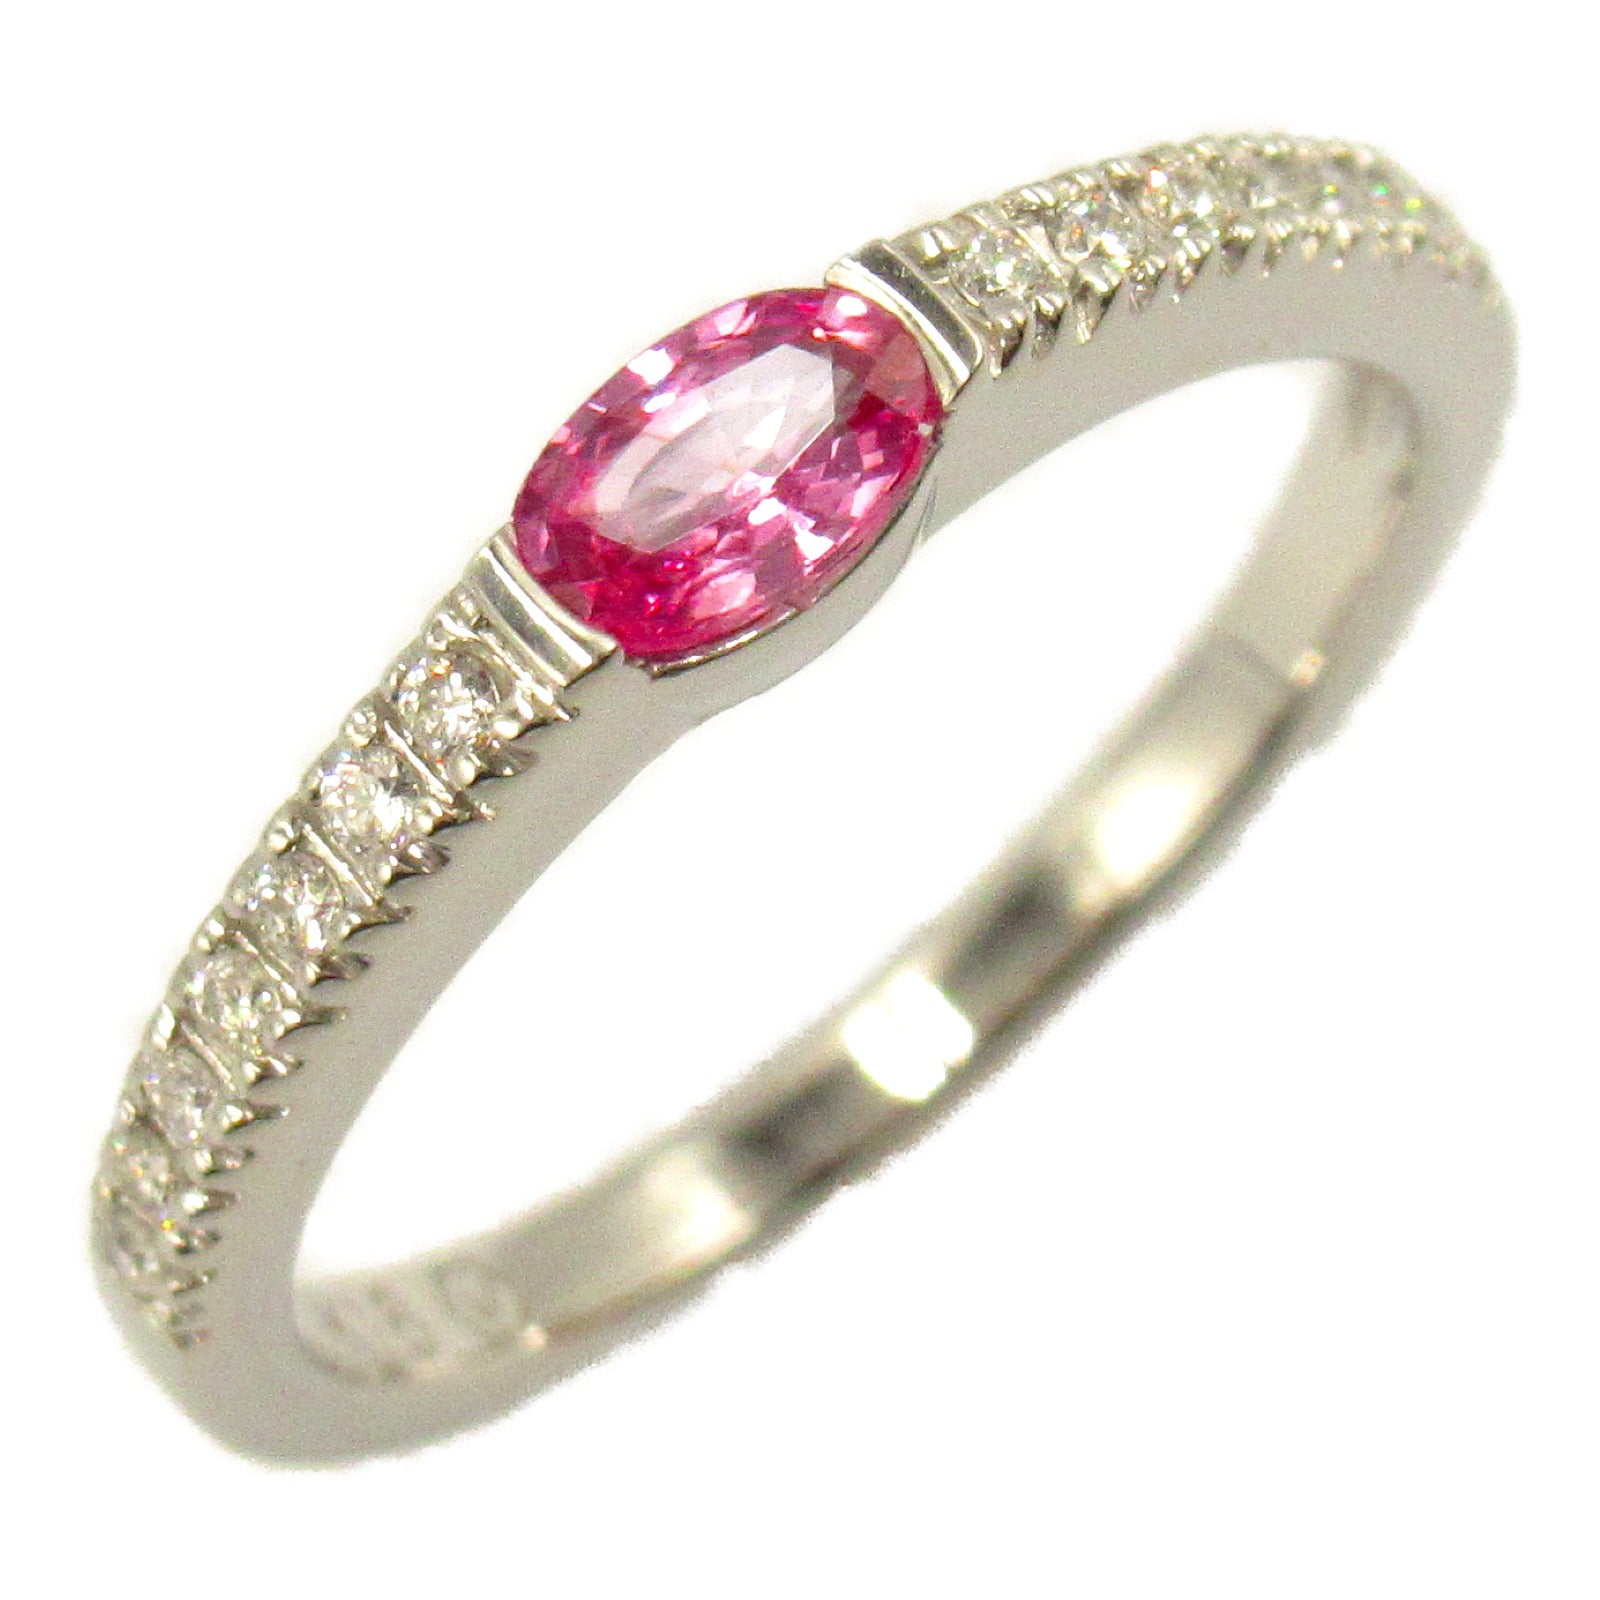 Vendome Aoyama Pink Sapphire Diamond Ring Ring Ring Ring Jewelry K18WG (White G) Diamond Pink Sapphire  Clear/Pink Rings